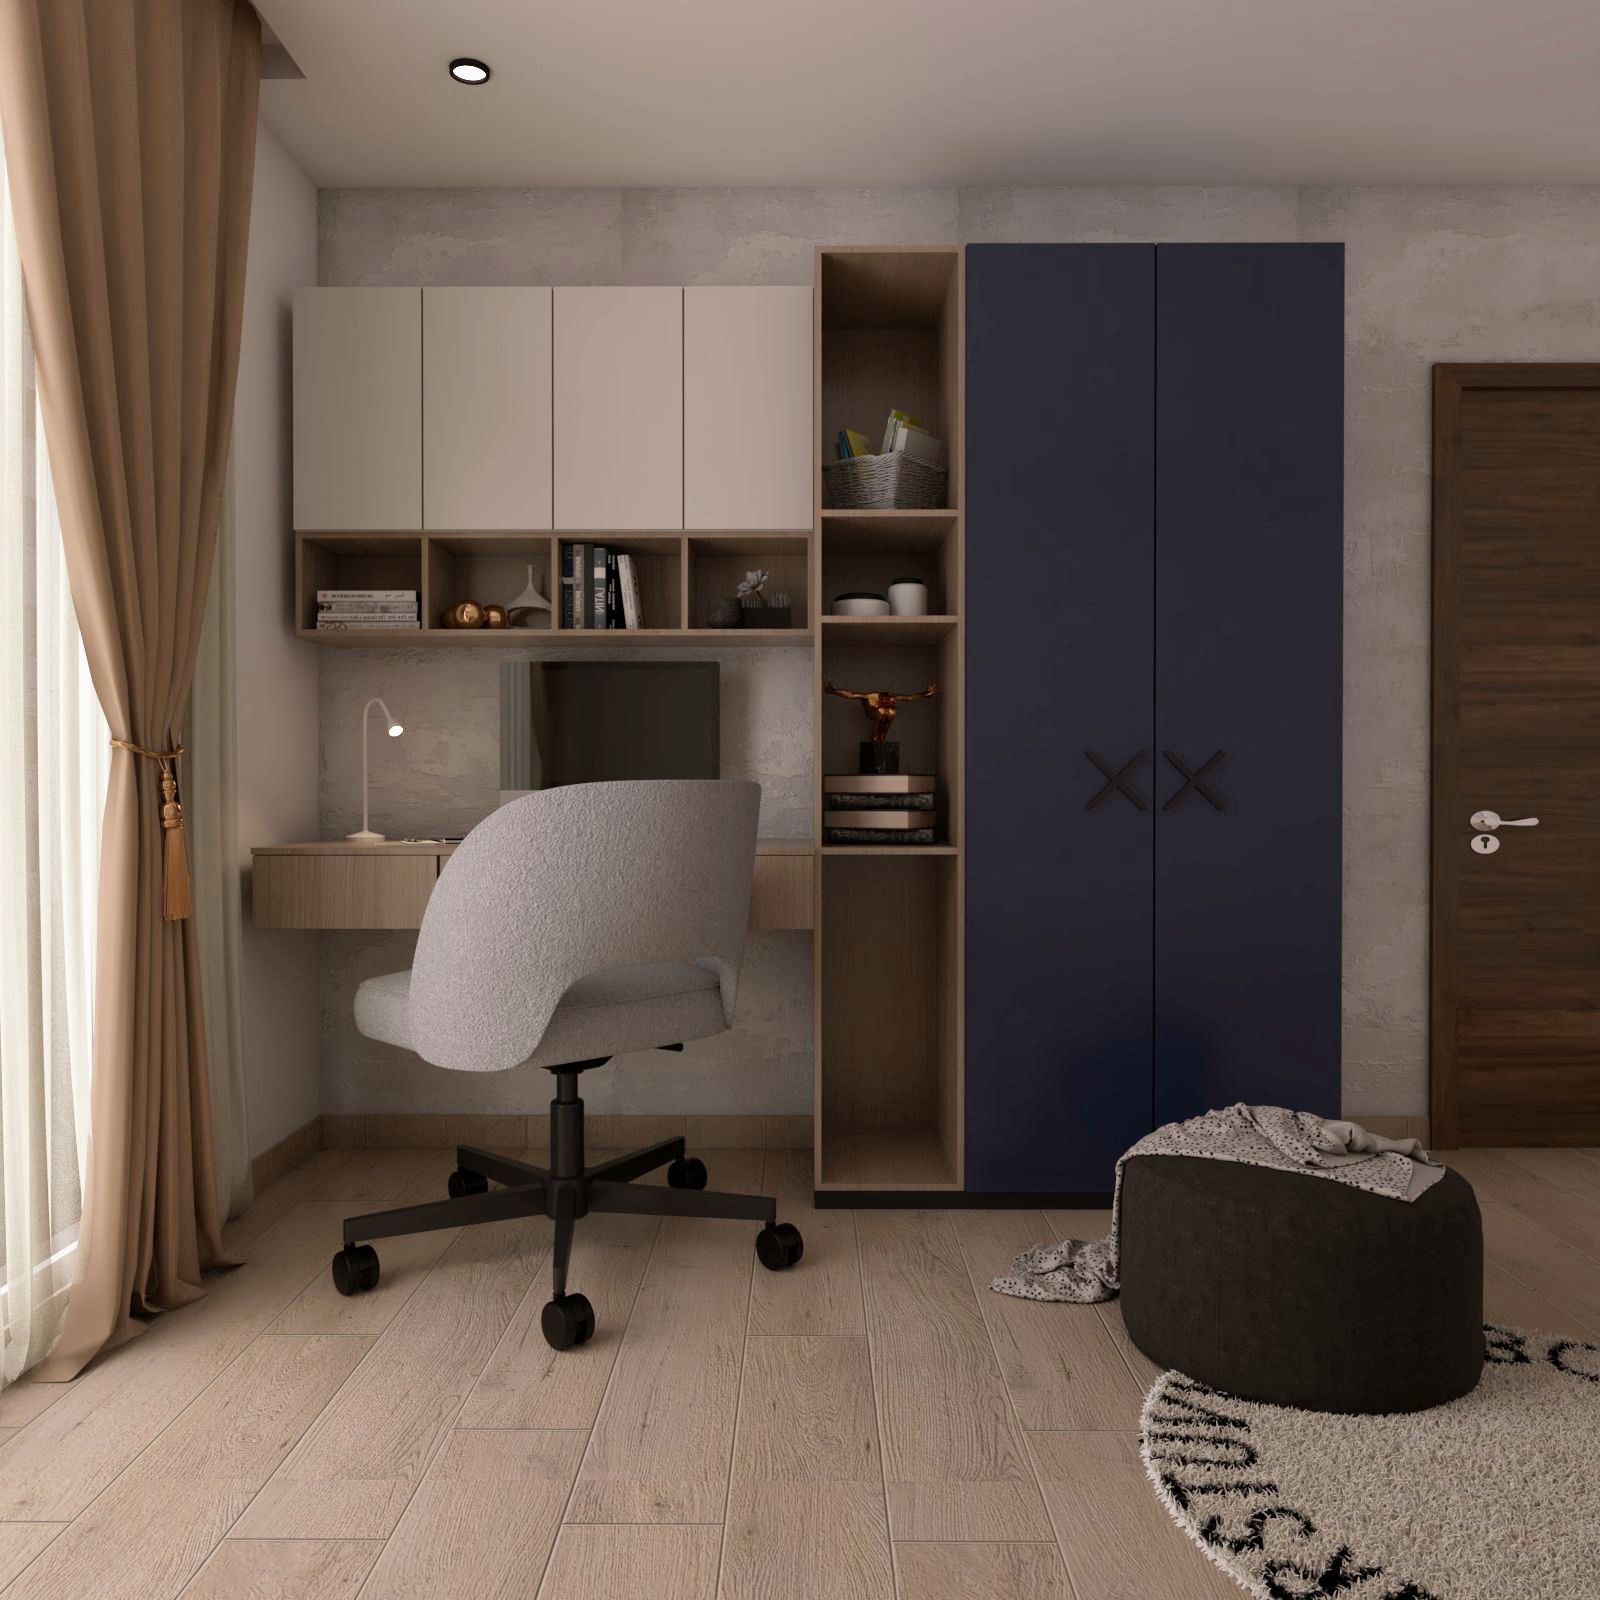 Contemporary Wood And White Home Office Design With Integrated Blue Wardrobe